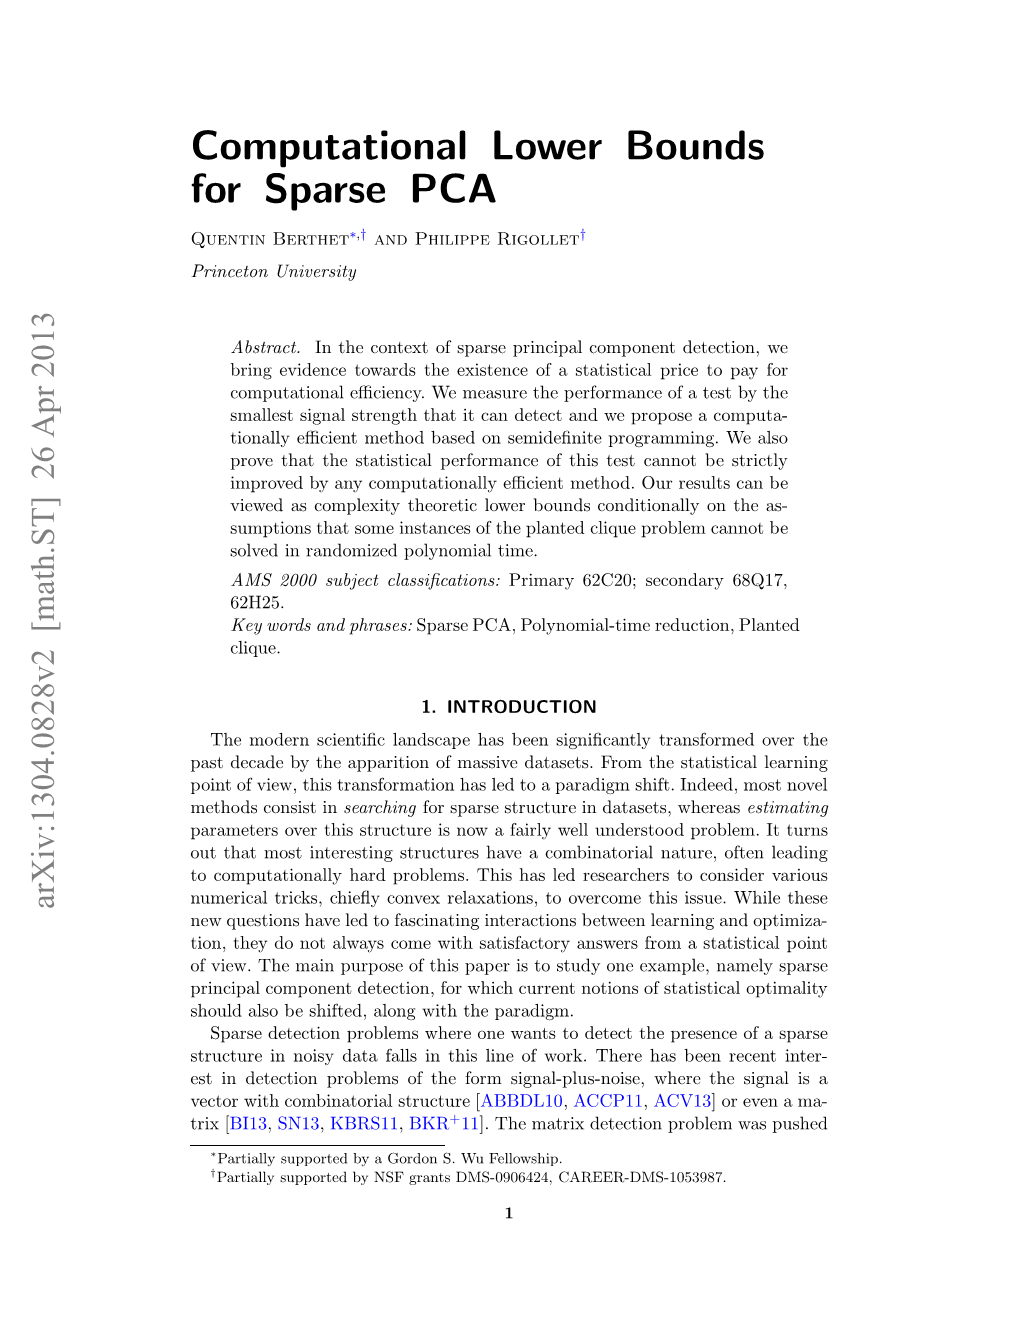 Computational Lower Bounds for Sparse Pca 3